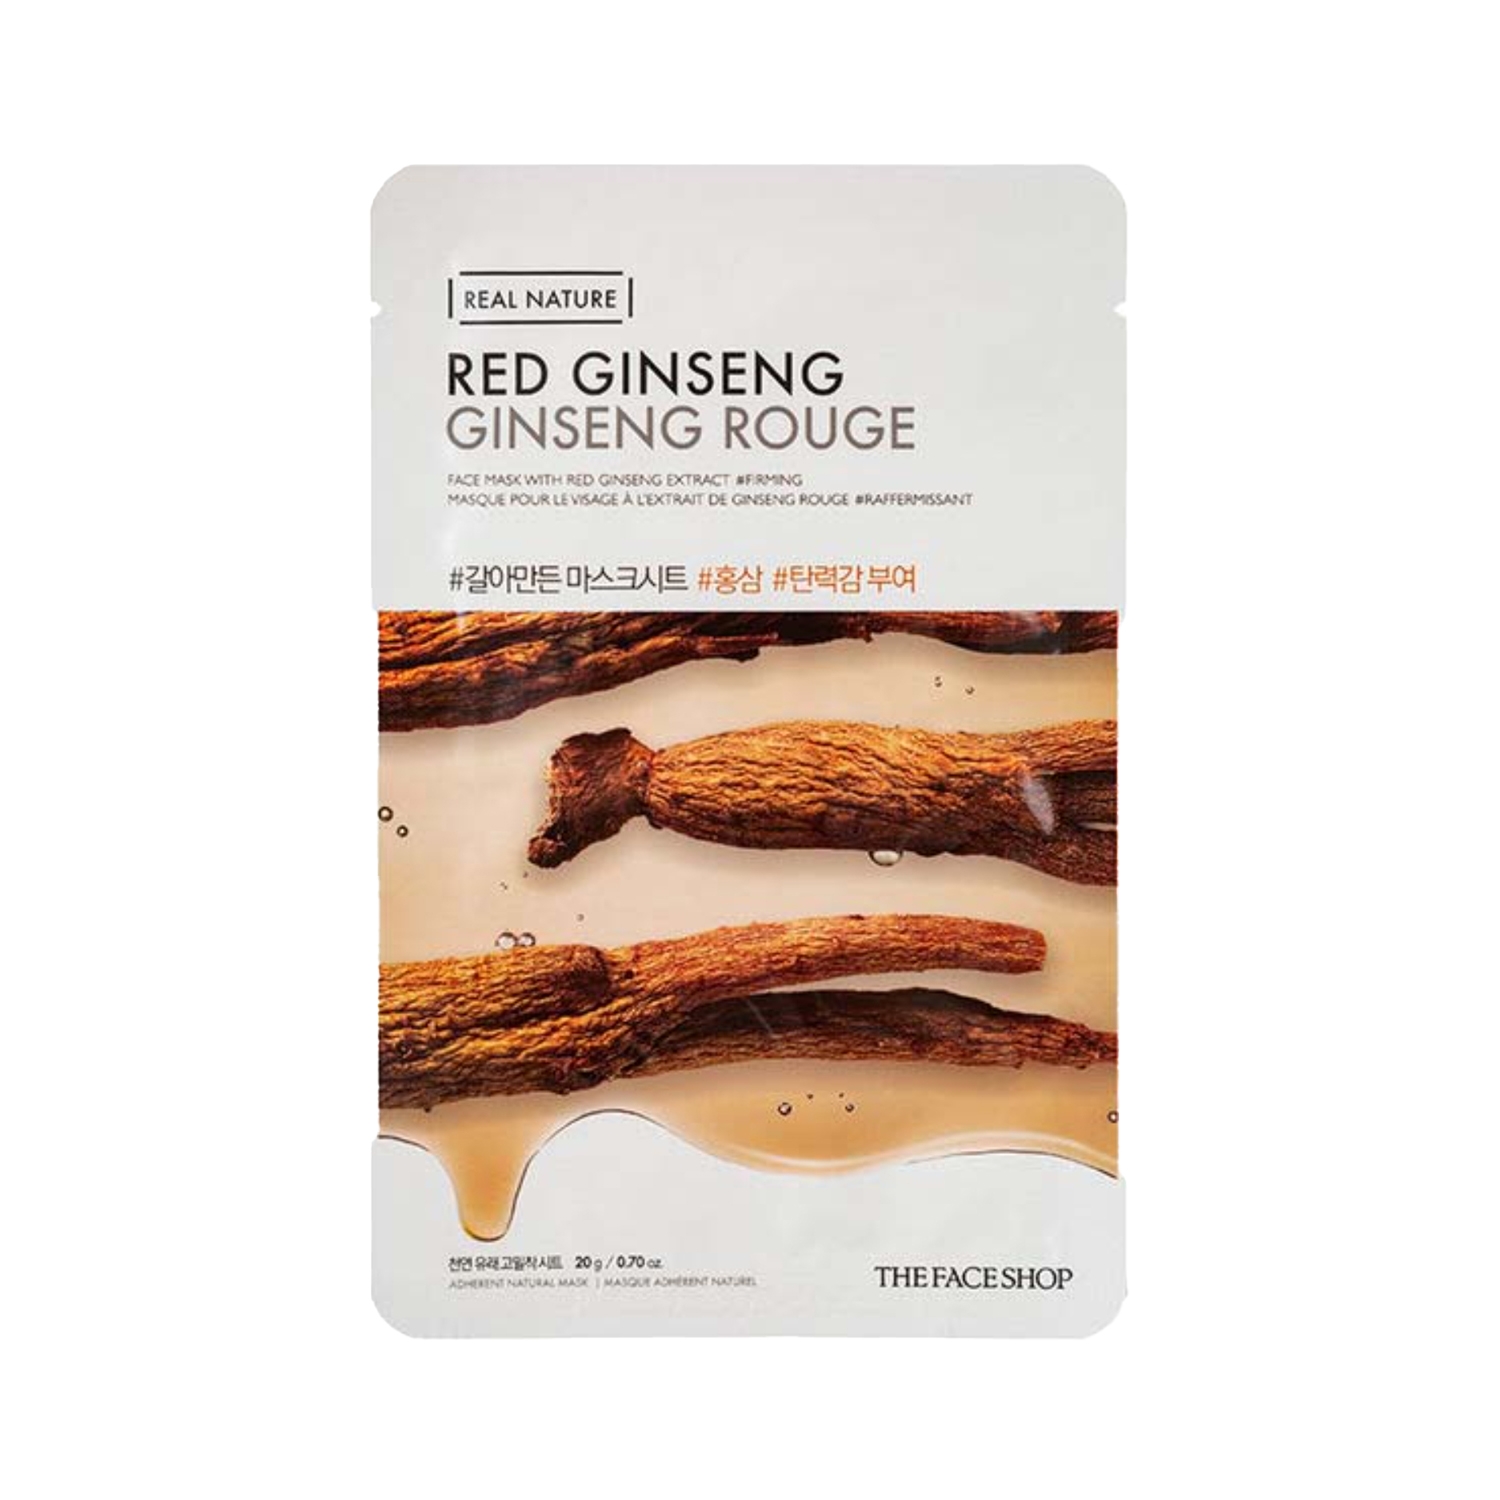 The Face Shop | The Face Shop Real Nature Red Ginseng Face Sheet Mask (20g)